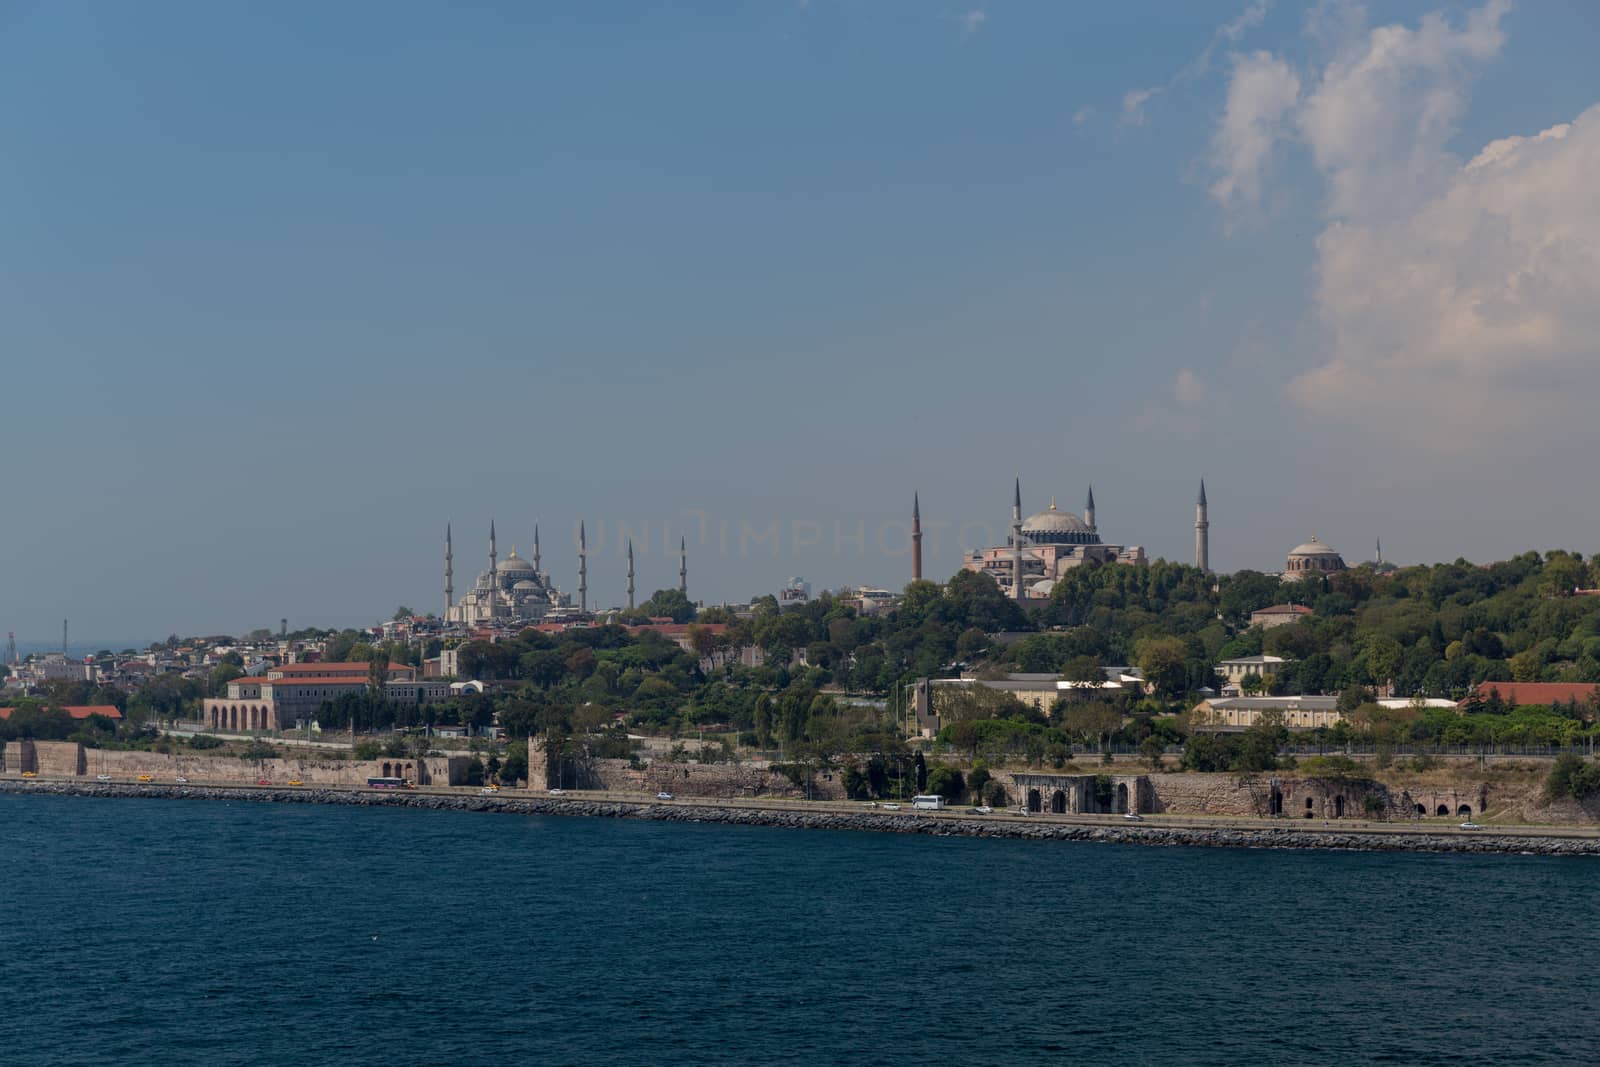 Taken from a cruise ship, this is the Older Skyline of Istanbul